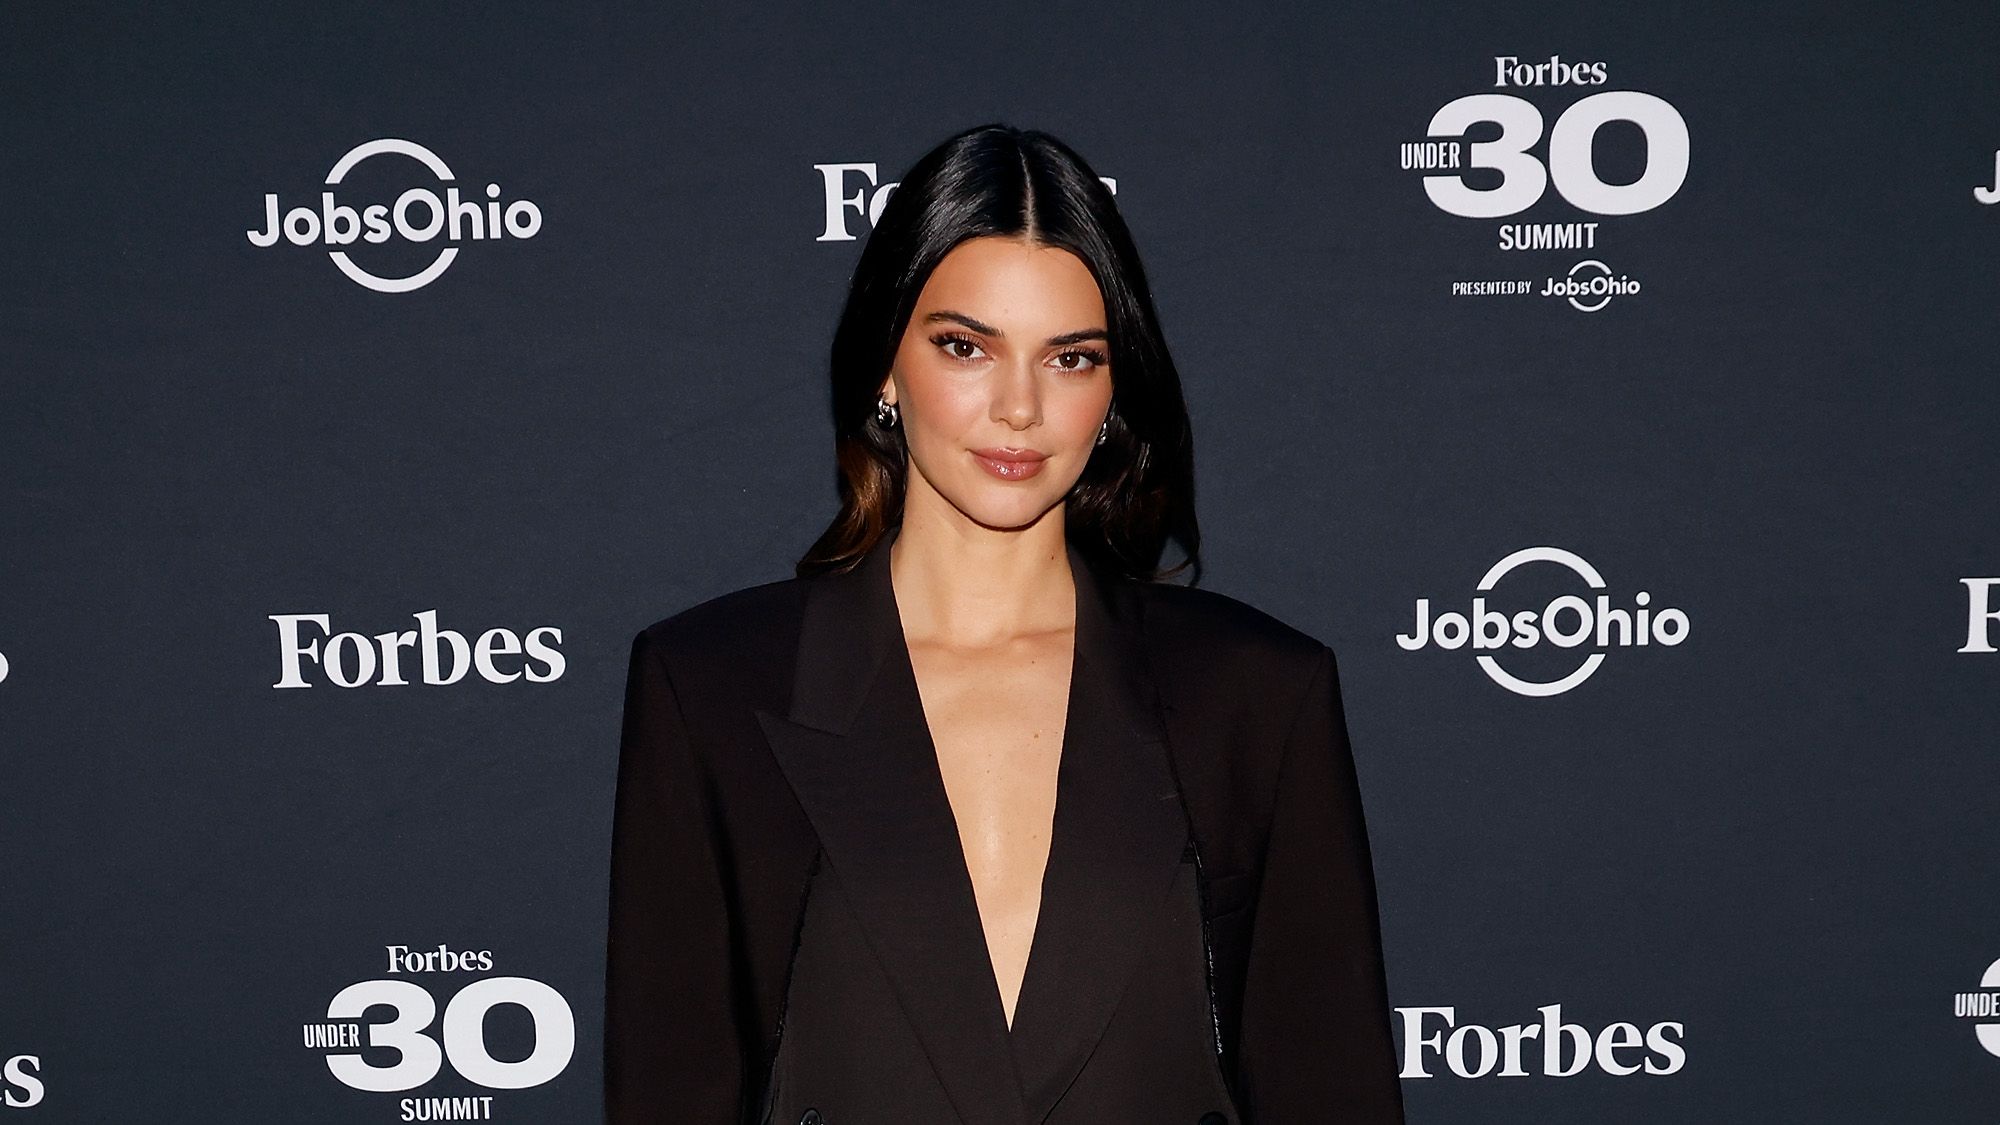 Kendall Jenner Put Her Own Feminine Touch on the Classic Power Suit